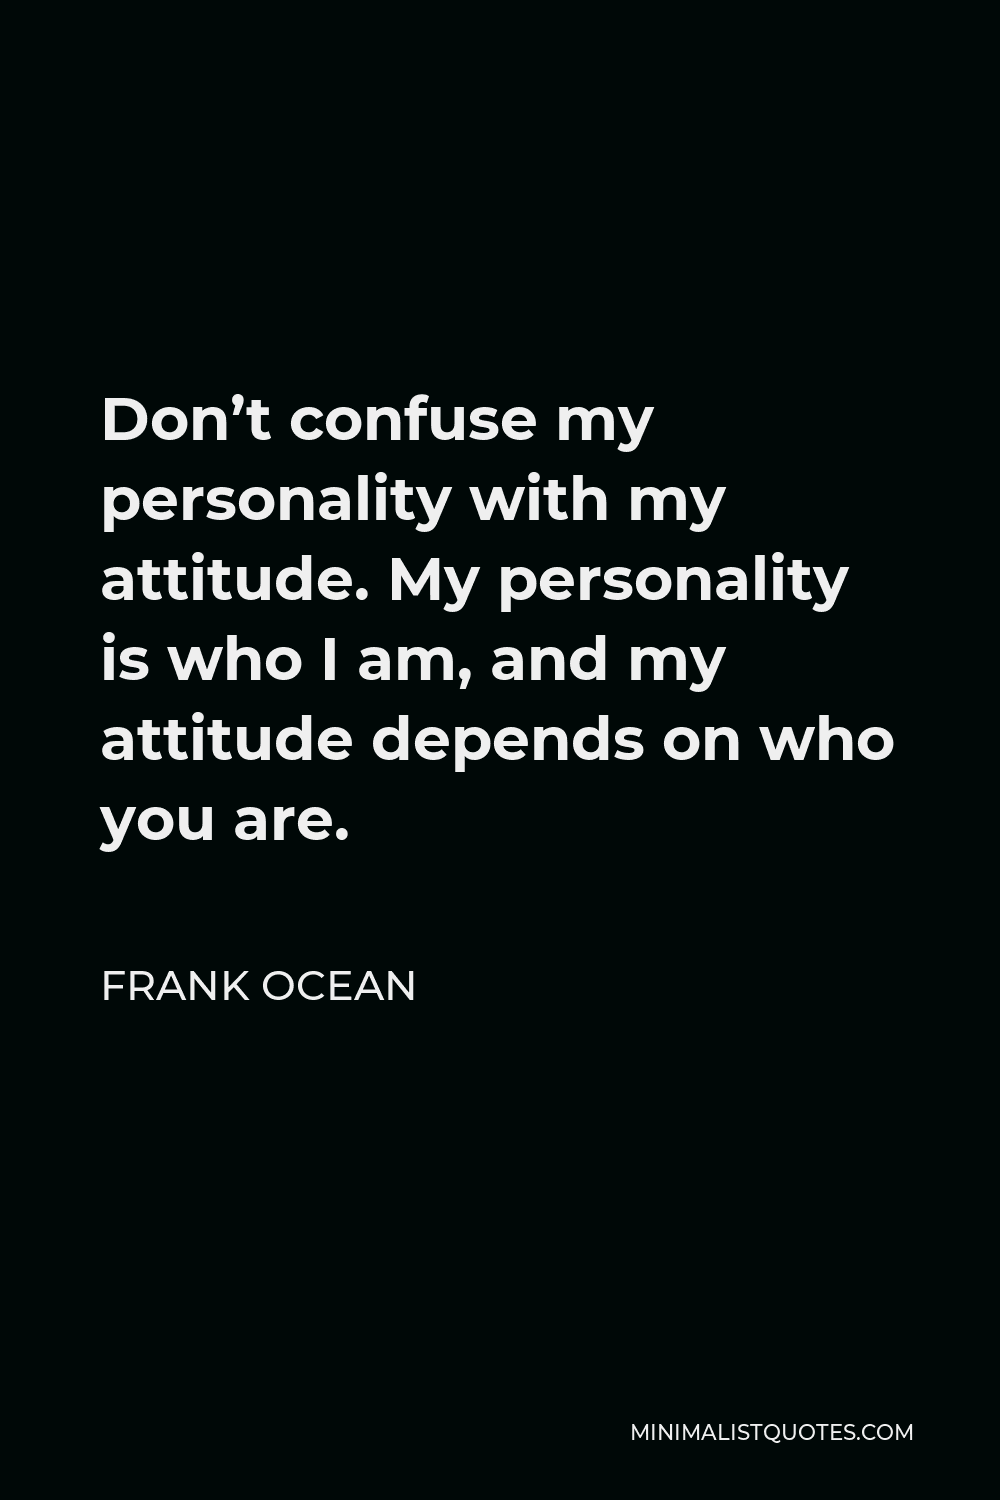 Frank Ocean Quote: Don't confuse my personality with my attitude ...